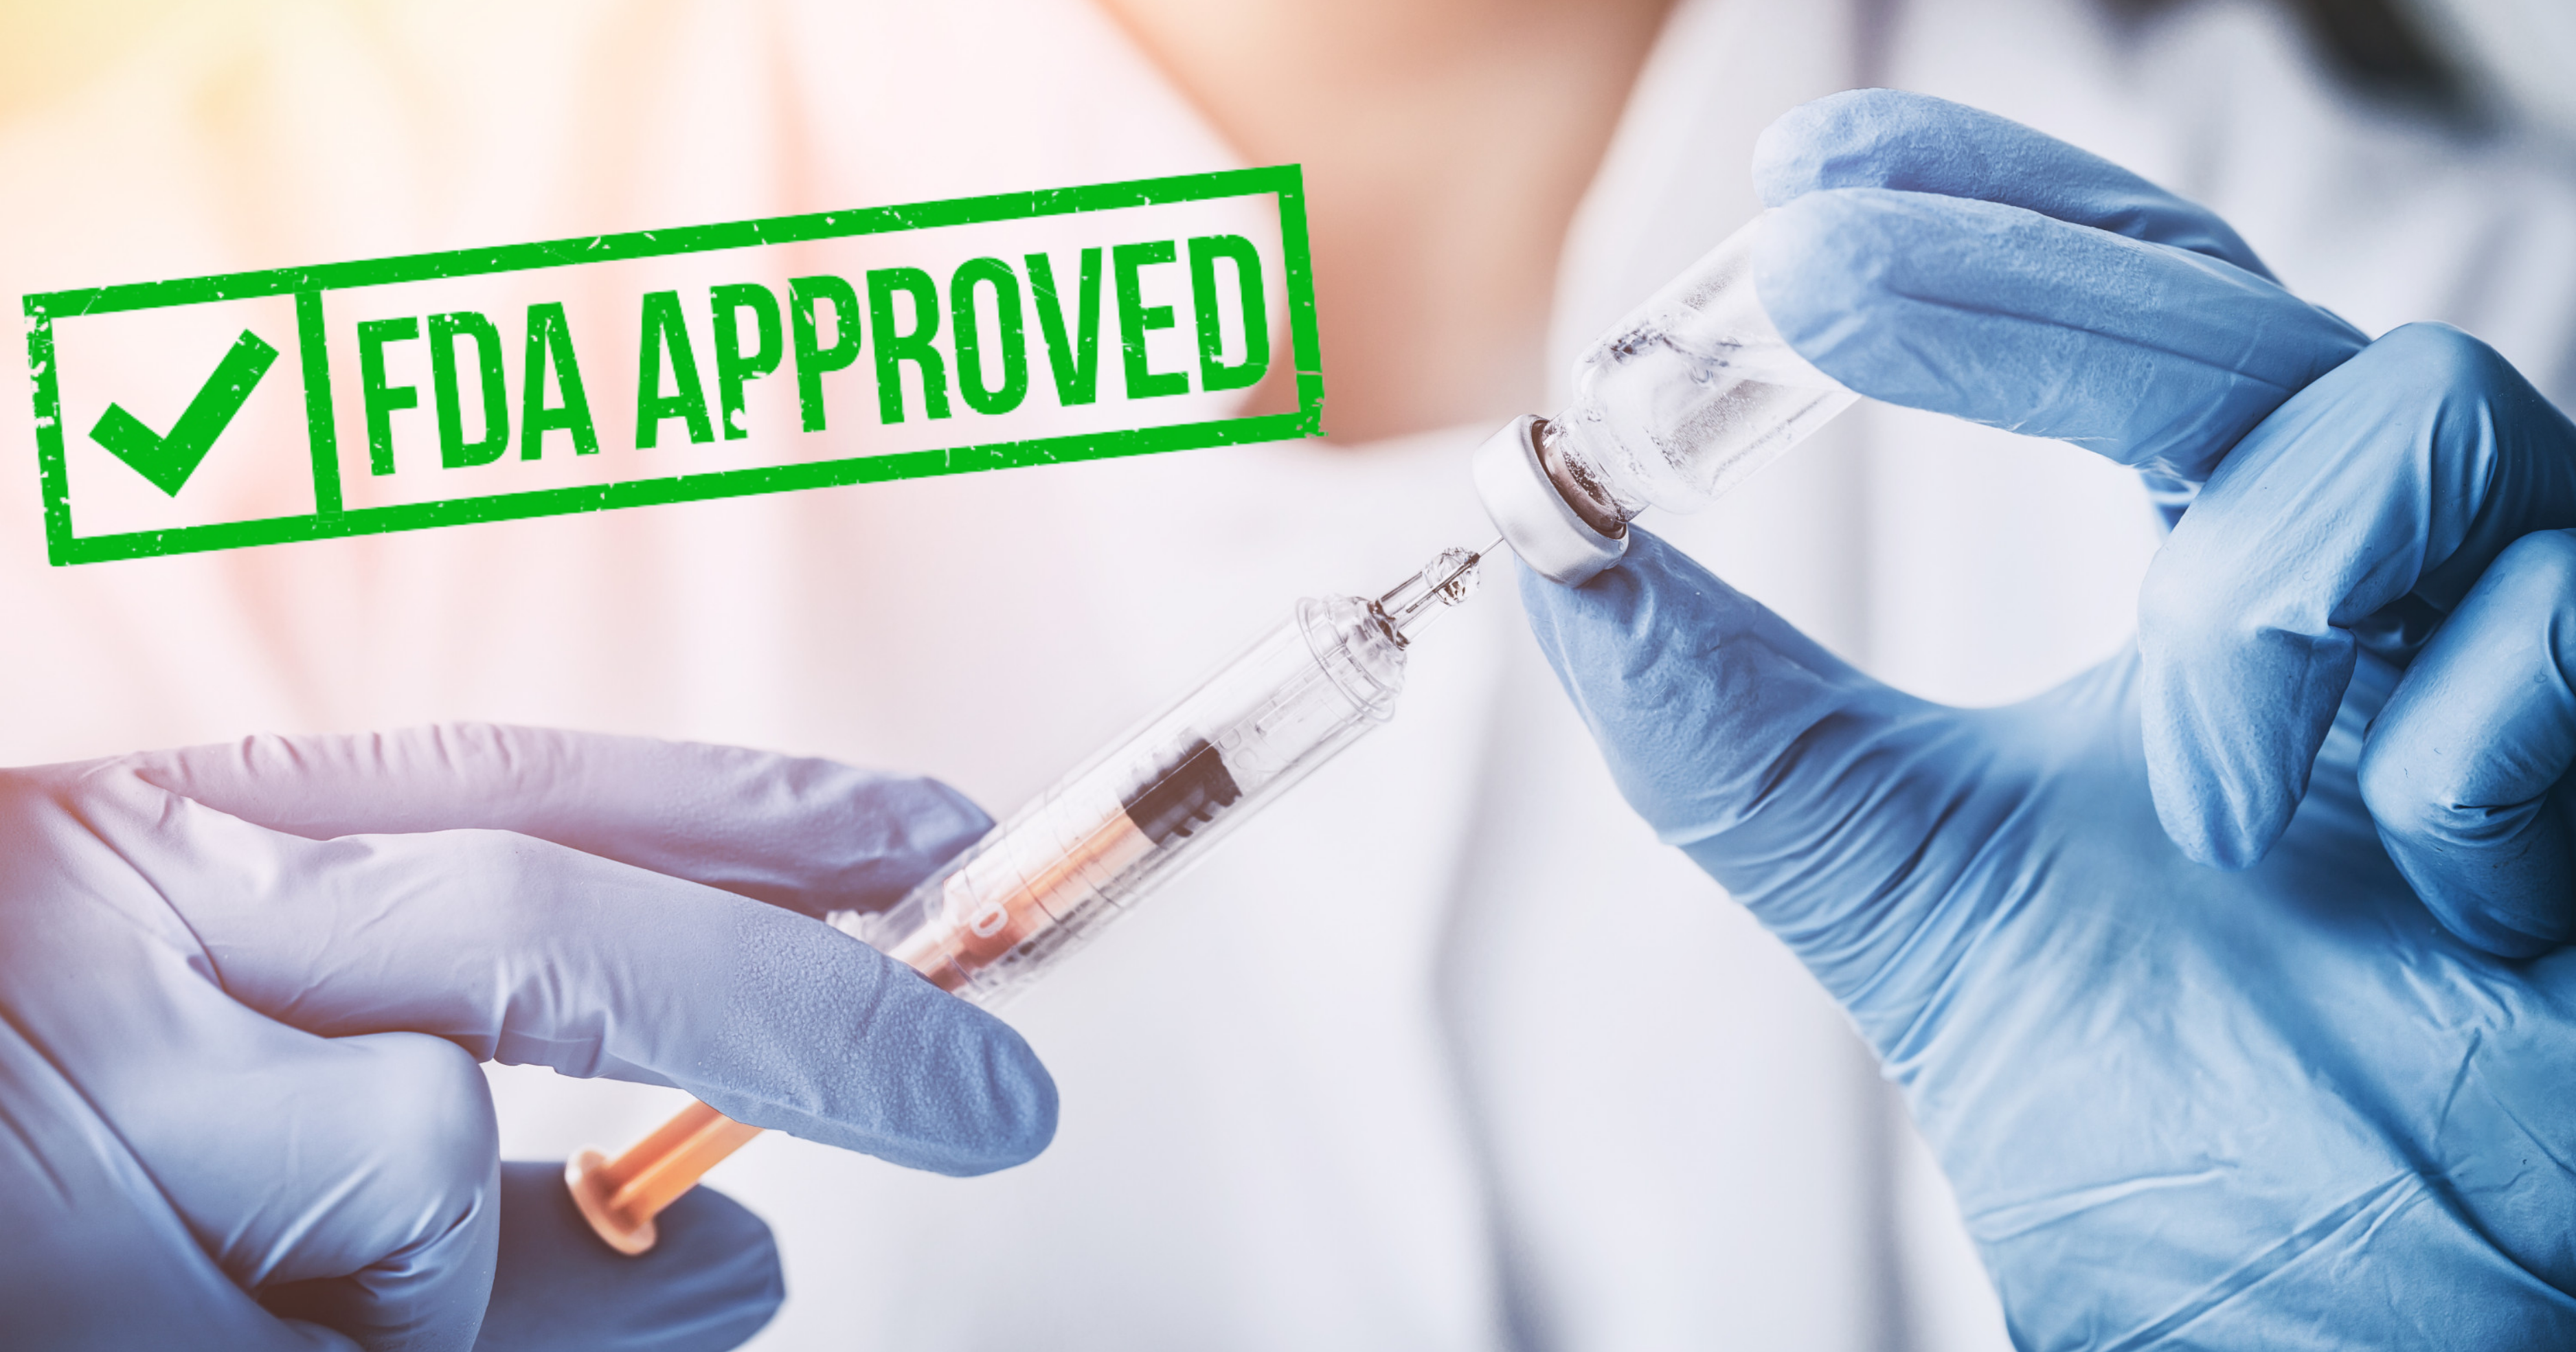 doctor filling syringe with FDA approved written over the image